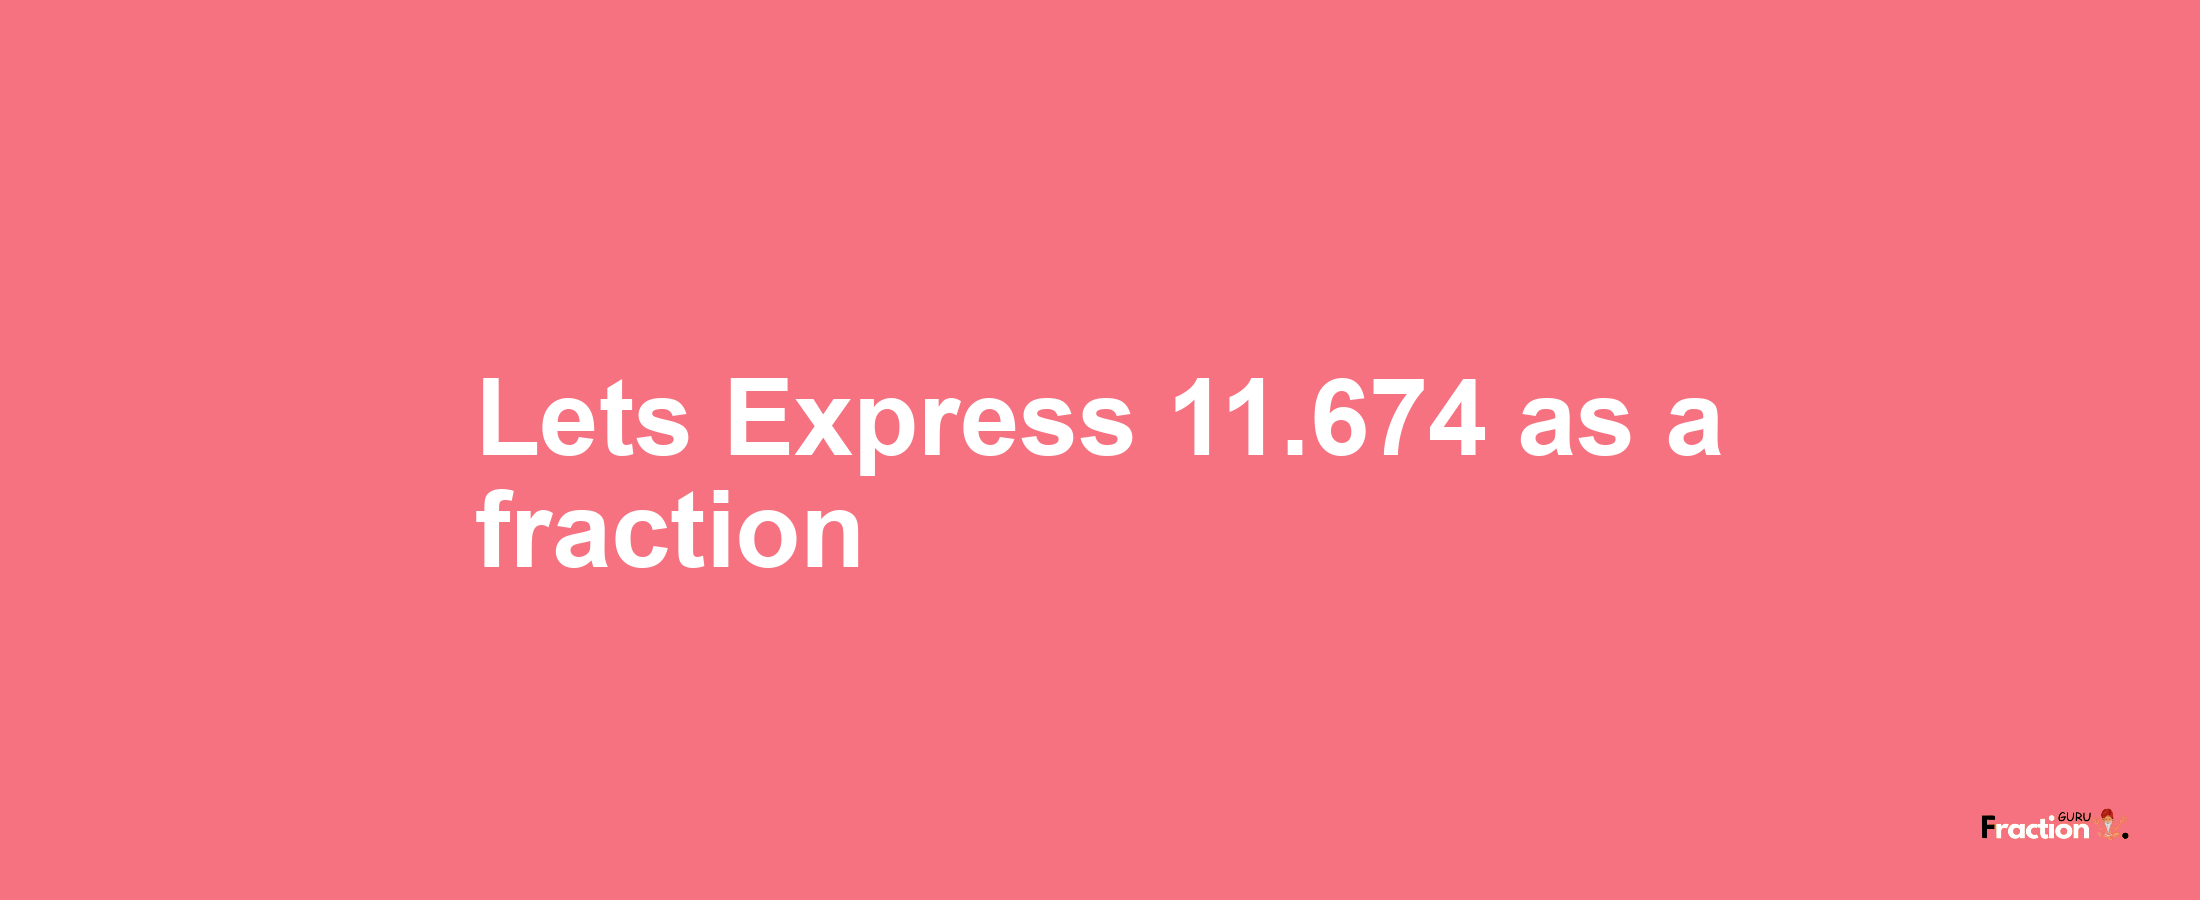 Lets Express 11.674 as afraction